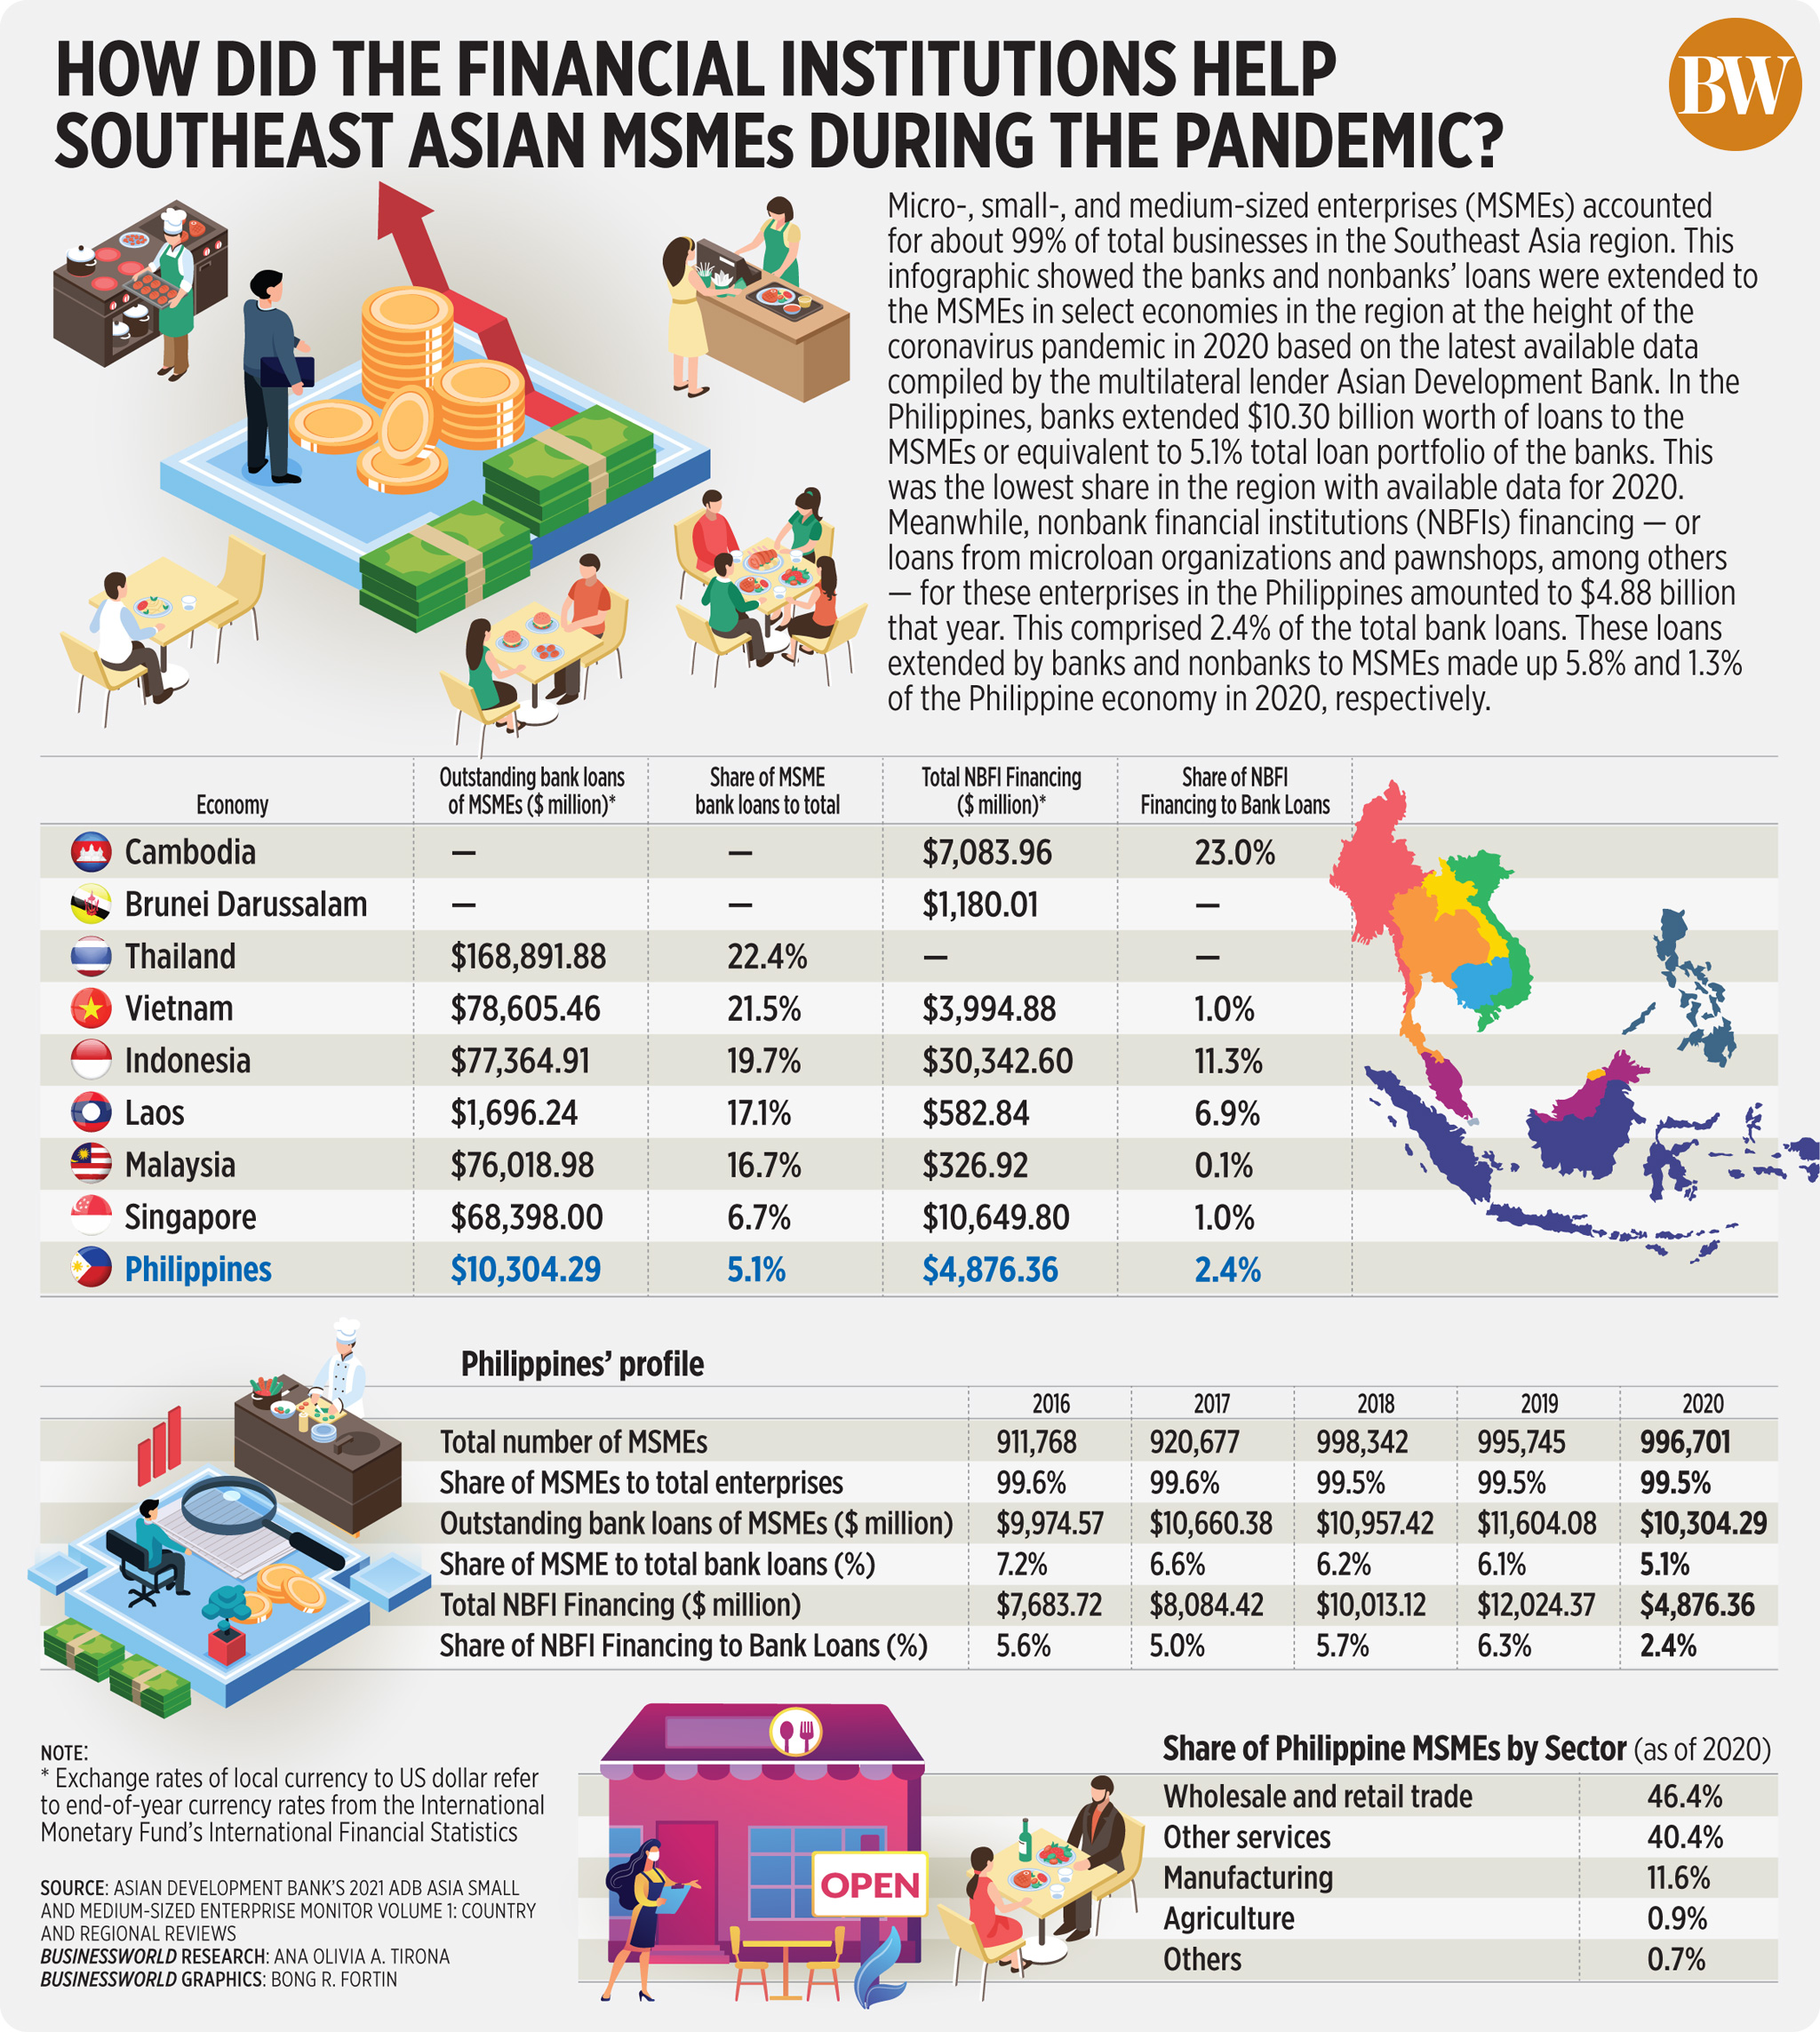 How did the financial institutions help Southeast Asian MSMEs during the pandemic?